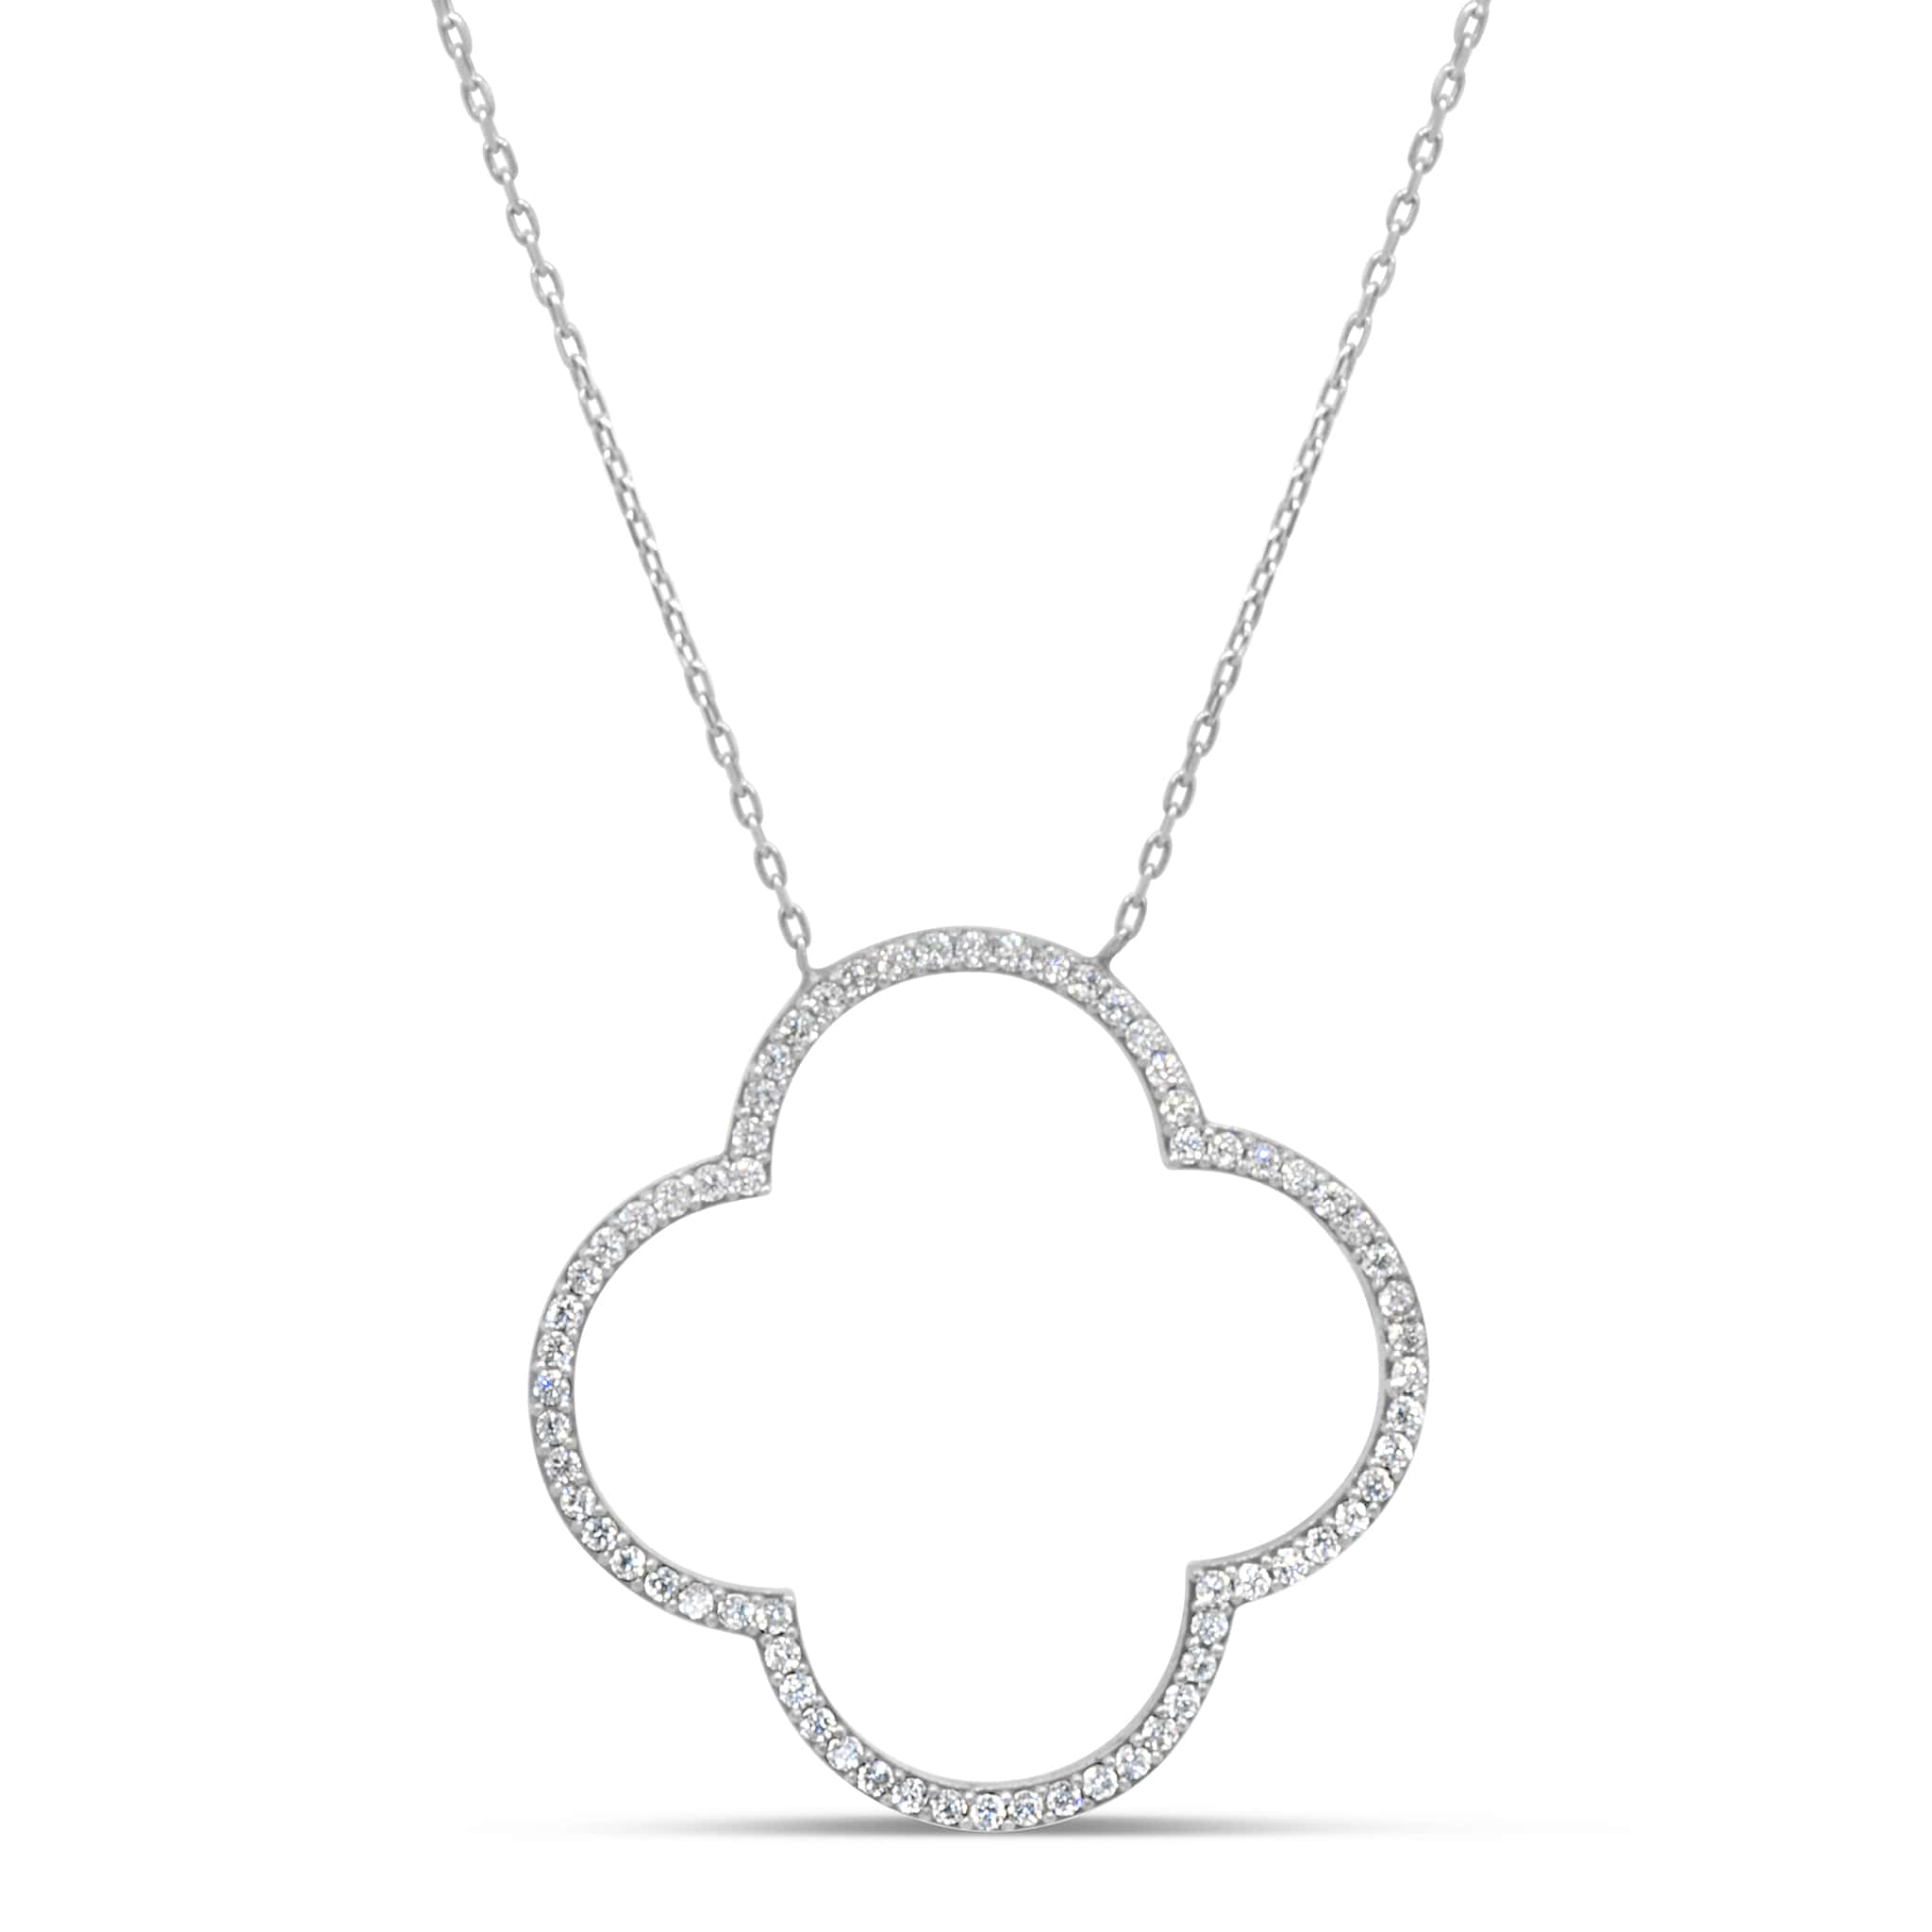 Four-Leaf Clover Necklace Encrusted with Cubic Zirconia in sterling silver